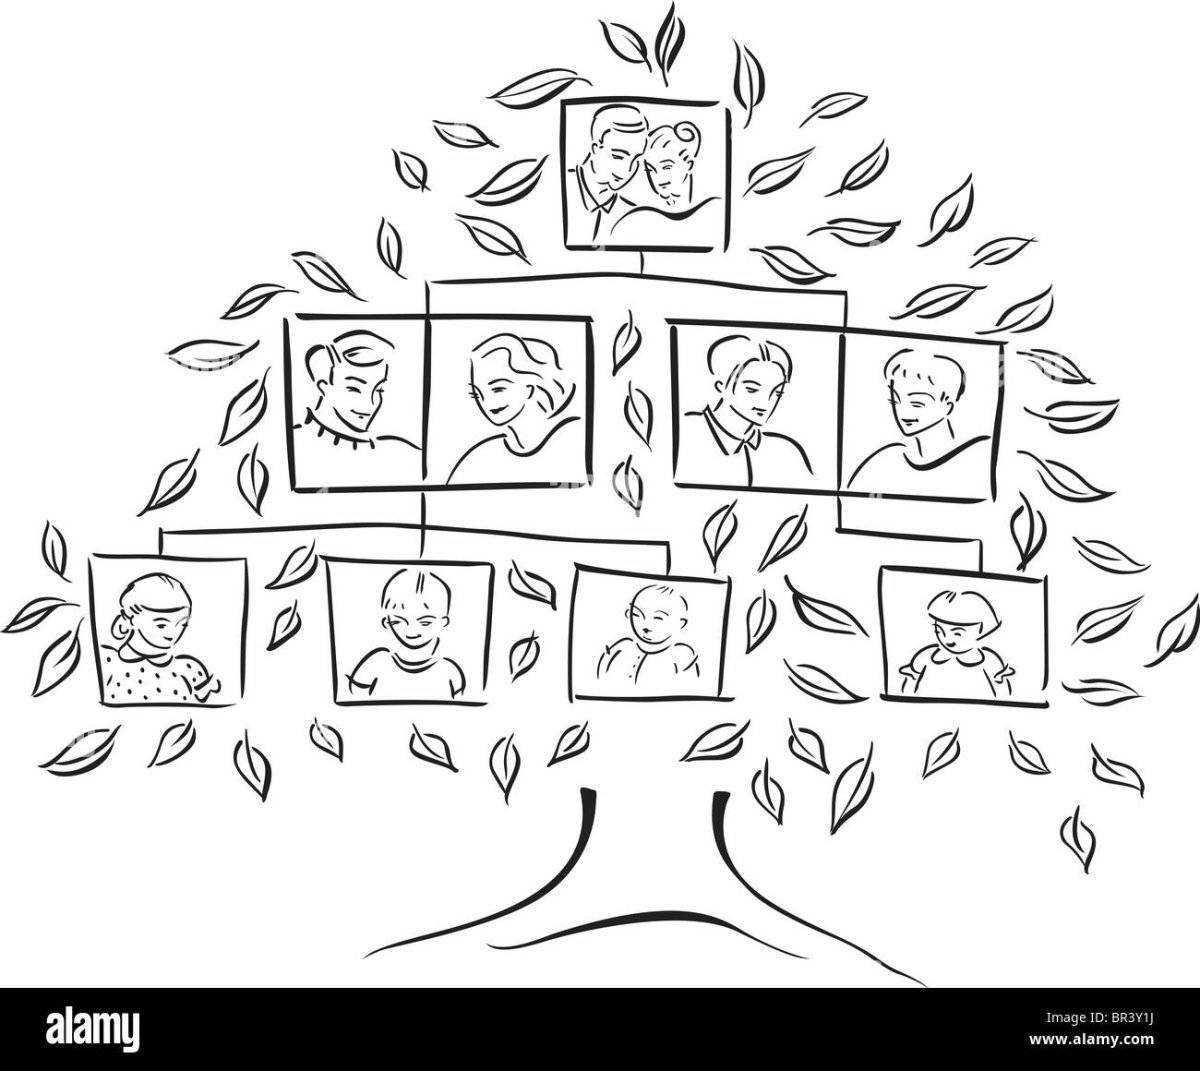 Great family tree template